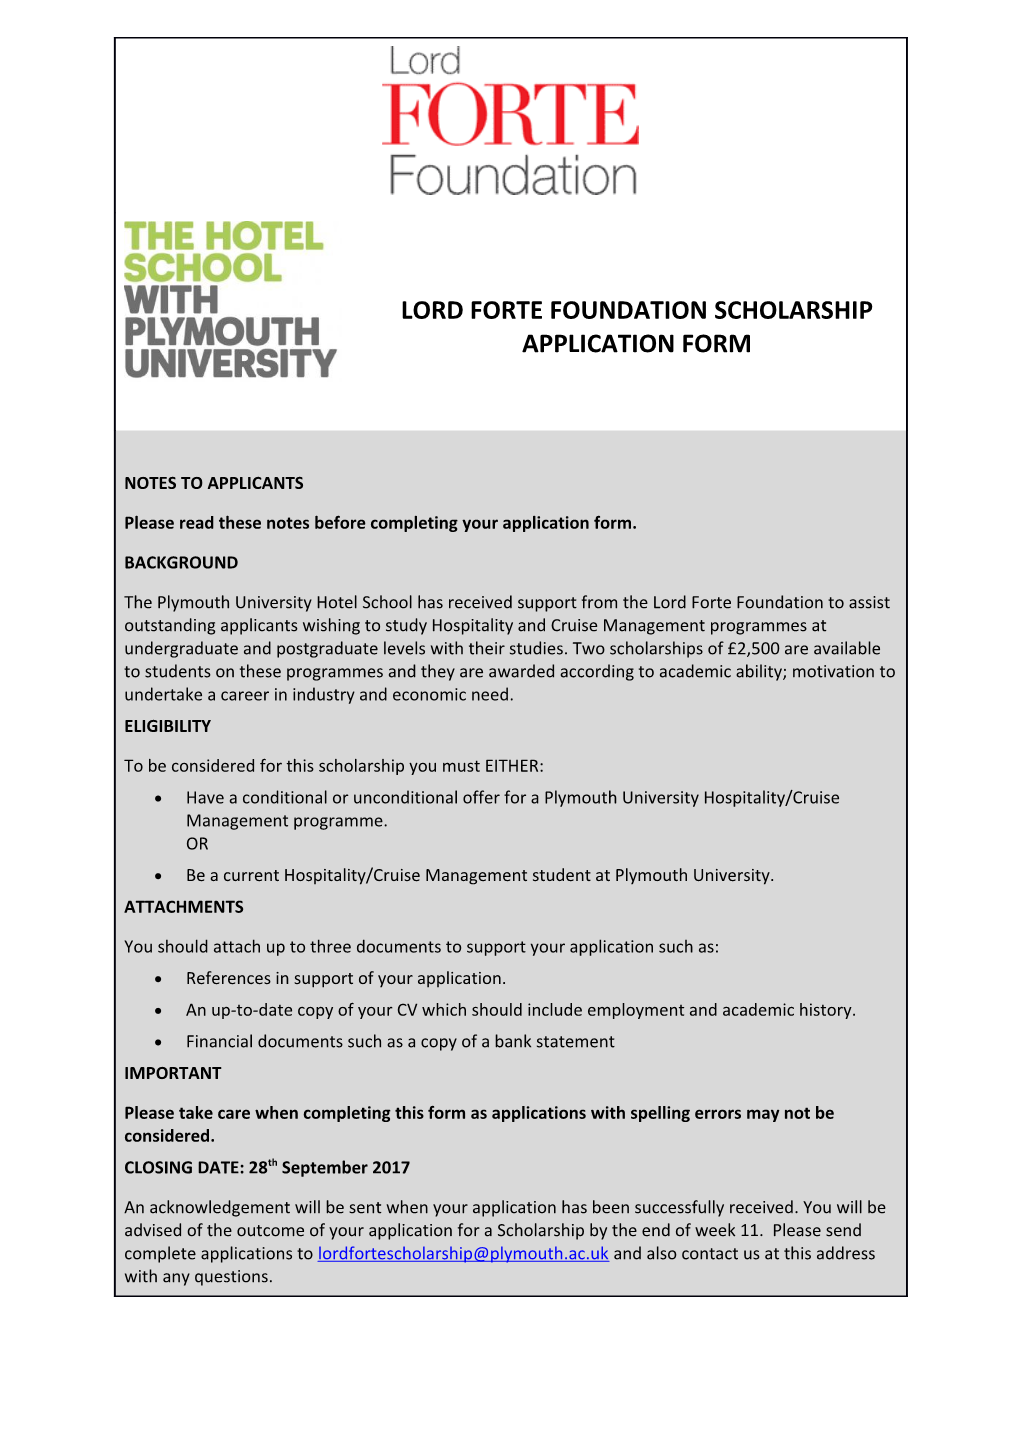 Lord Forte Foundation Scholarship Application Form